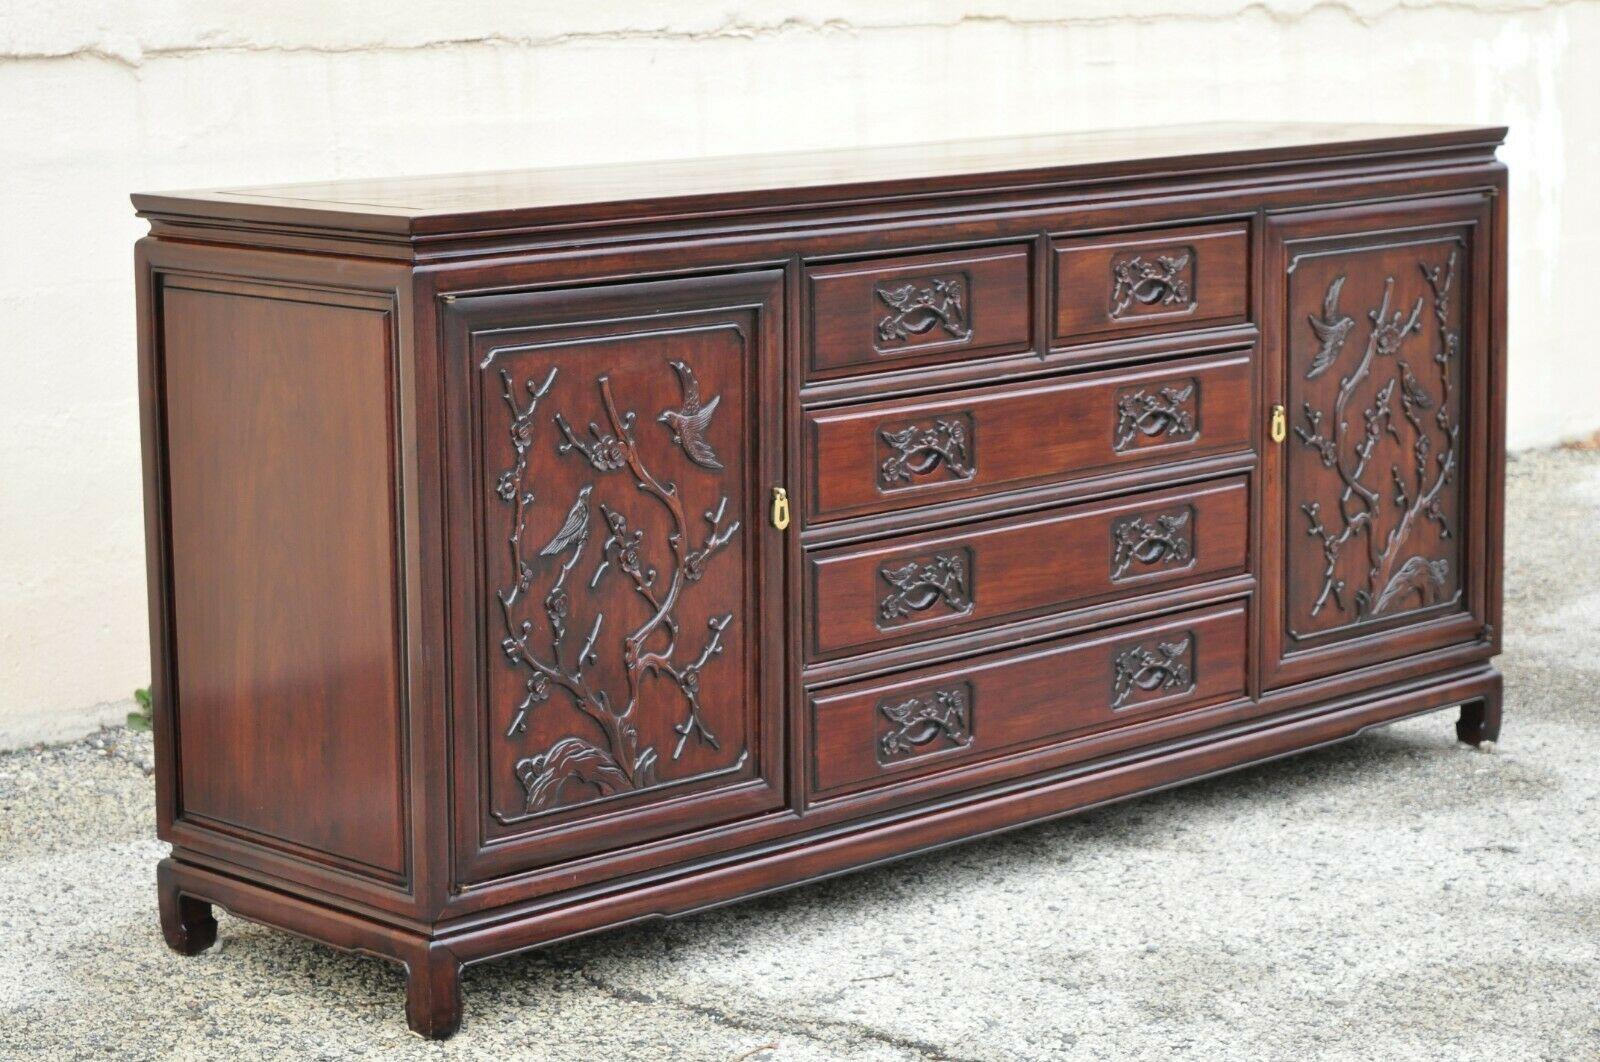 Vintage Chinese Bird Carved Mahogany Hardwood Buffet Sideboard Server Credenza. Item features bird carved fronts, solid wood construction, beautiful wood grain, nicely carved details, 2 swing doors, 5 dovetailed drawers, 2 wooden shelves, quality